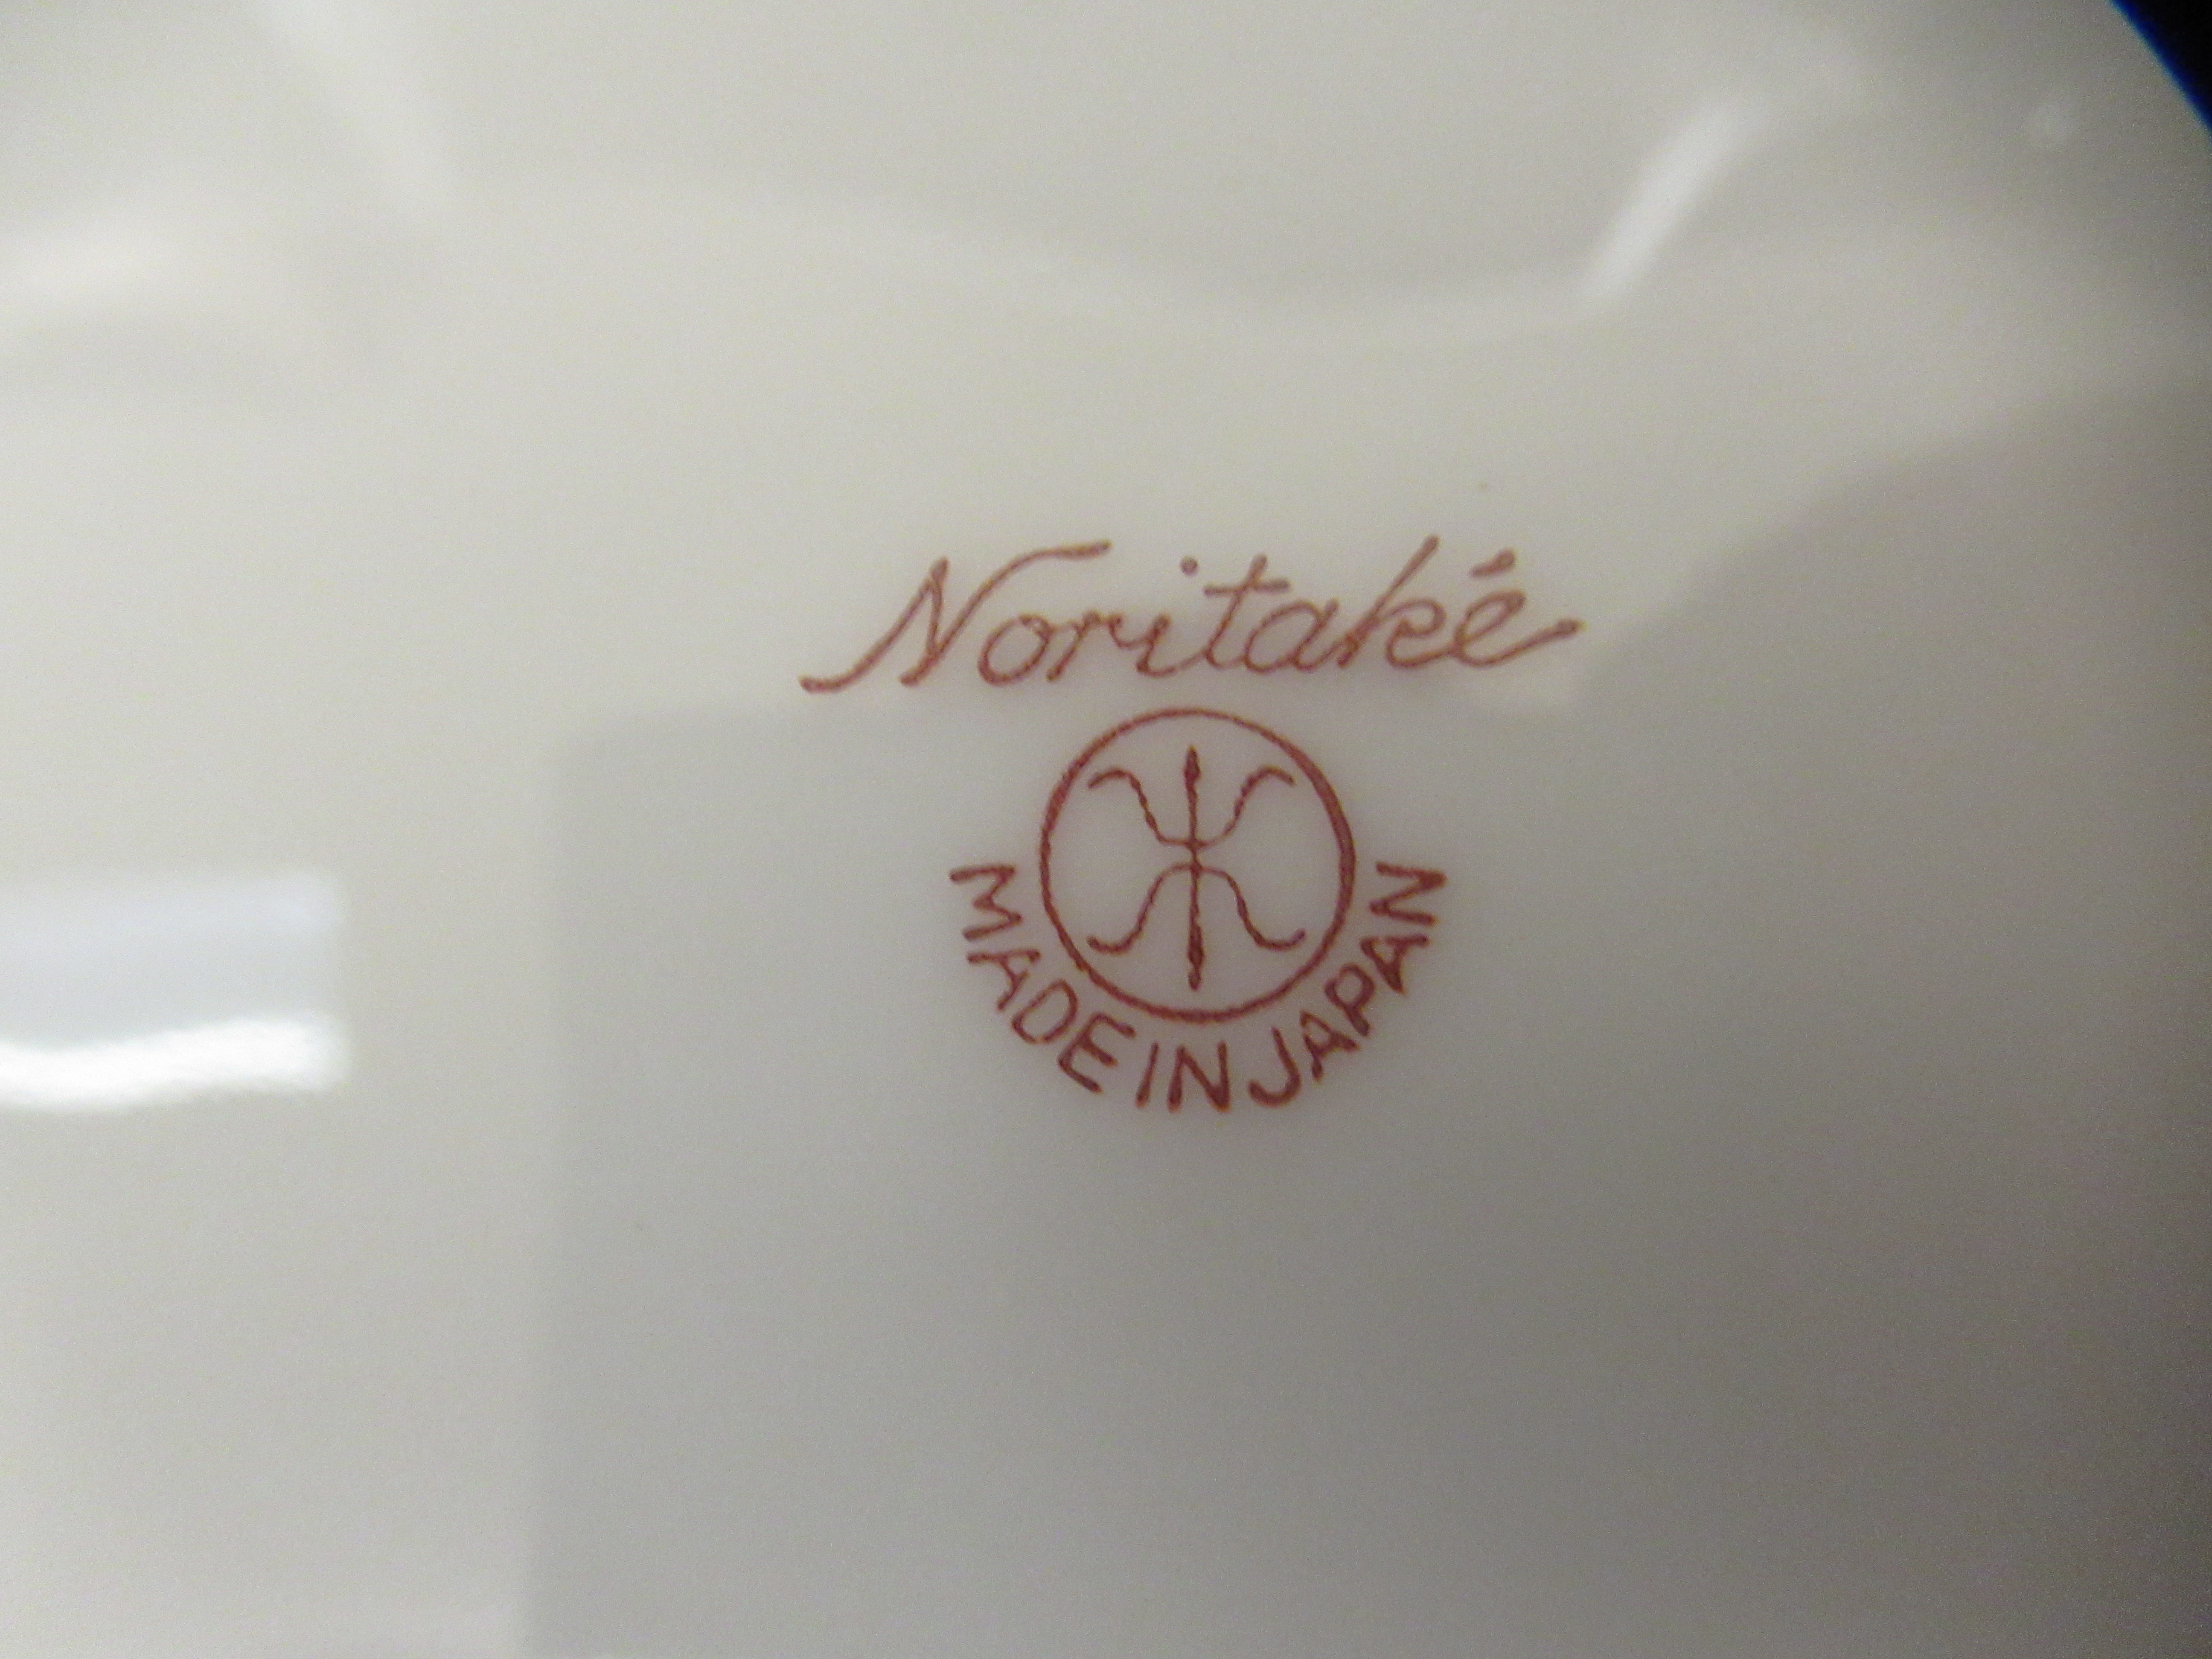 Noritake porcelain tableware, decorated with flora and gilding - Image 4 of 4